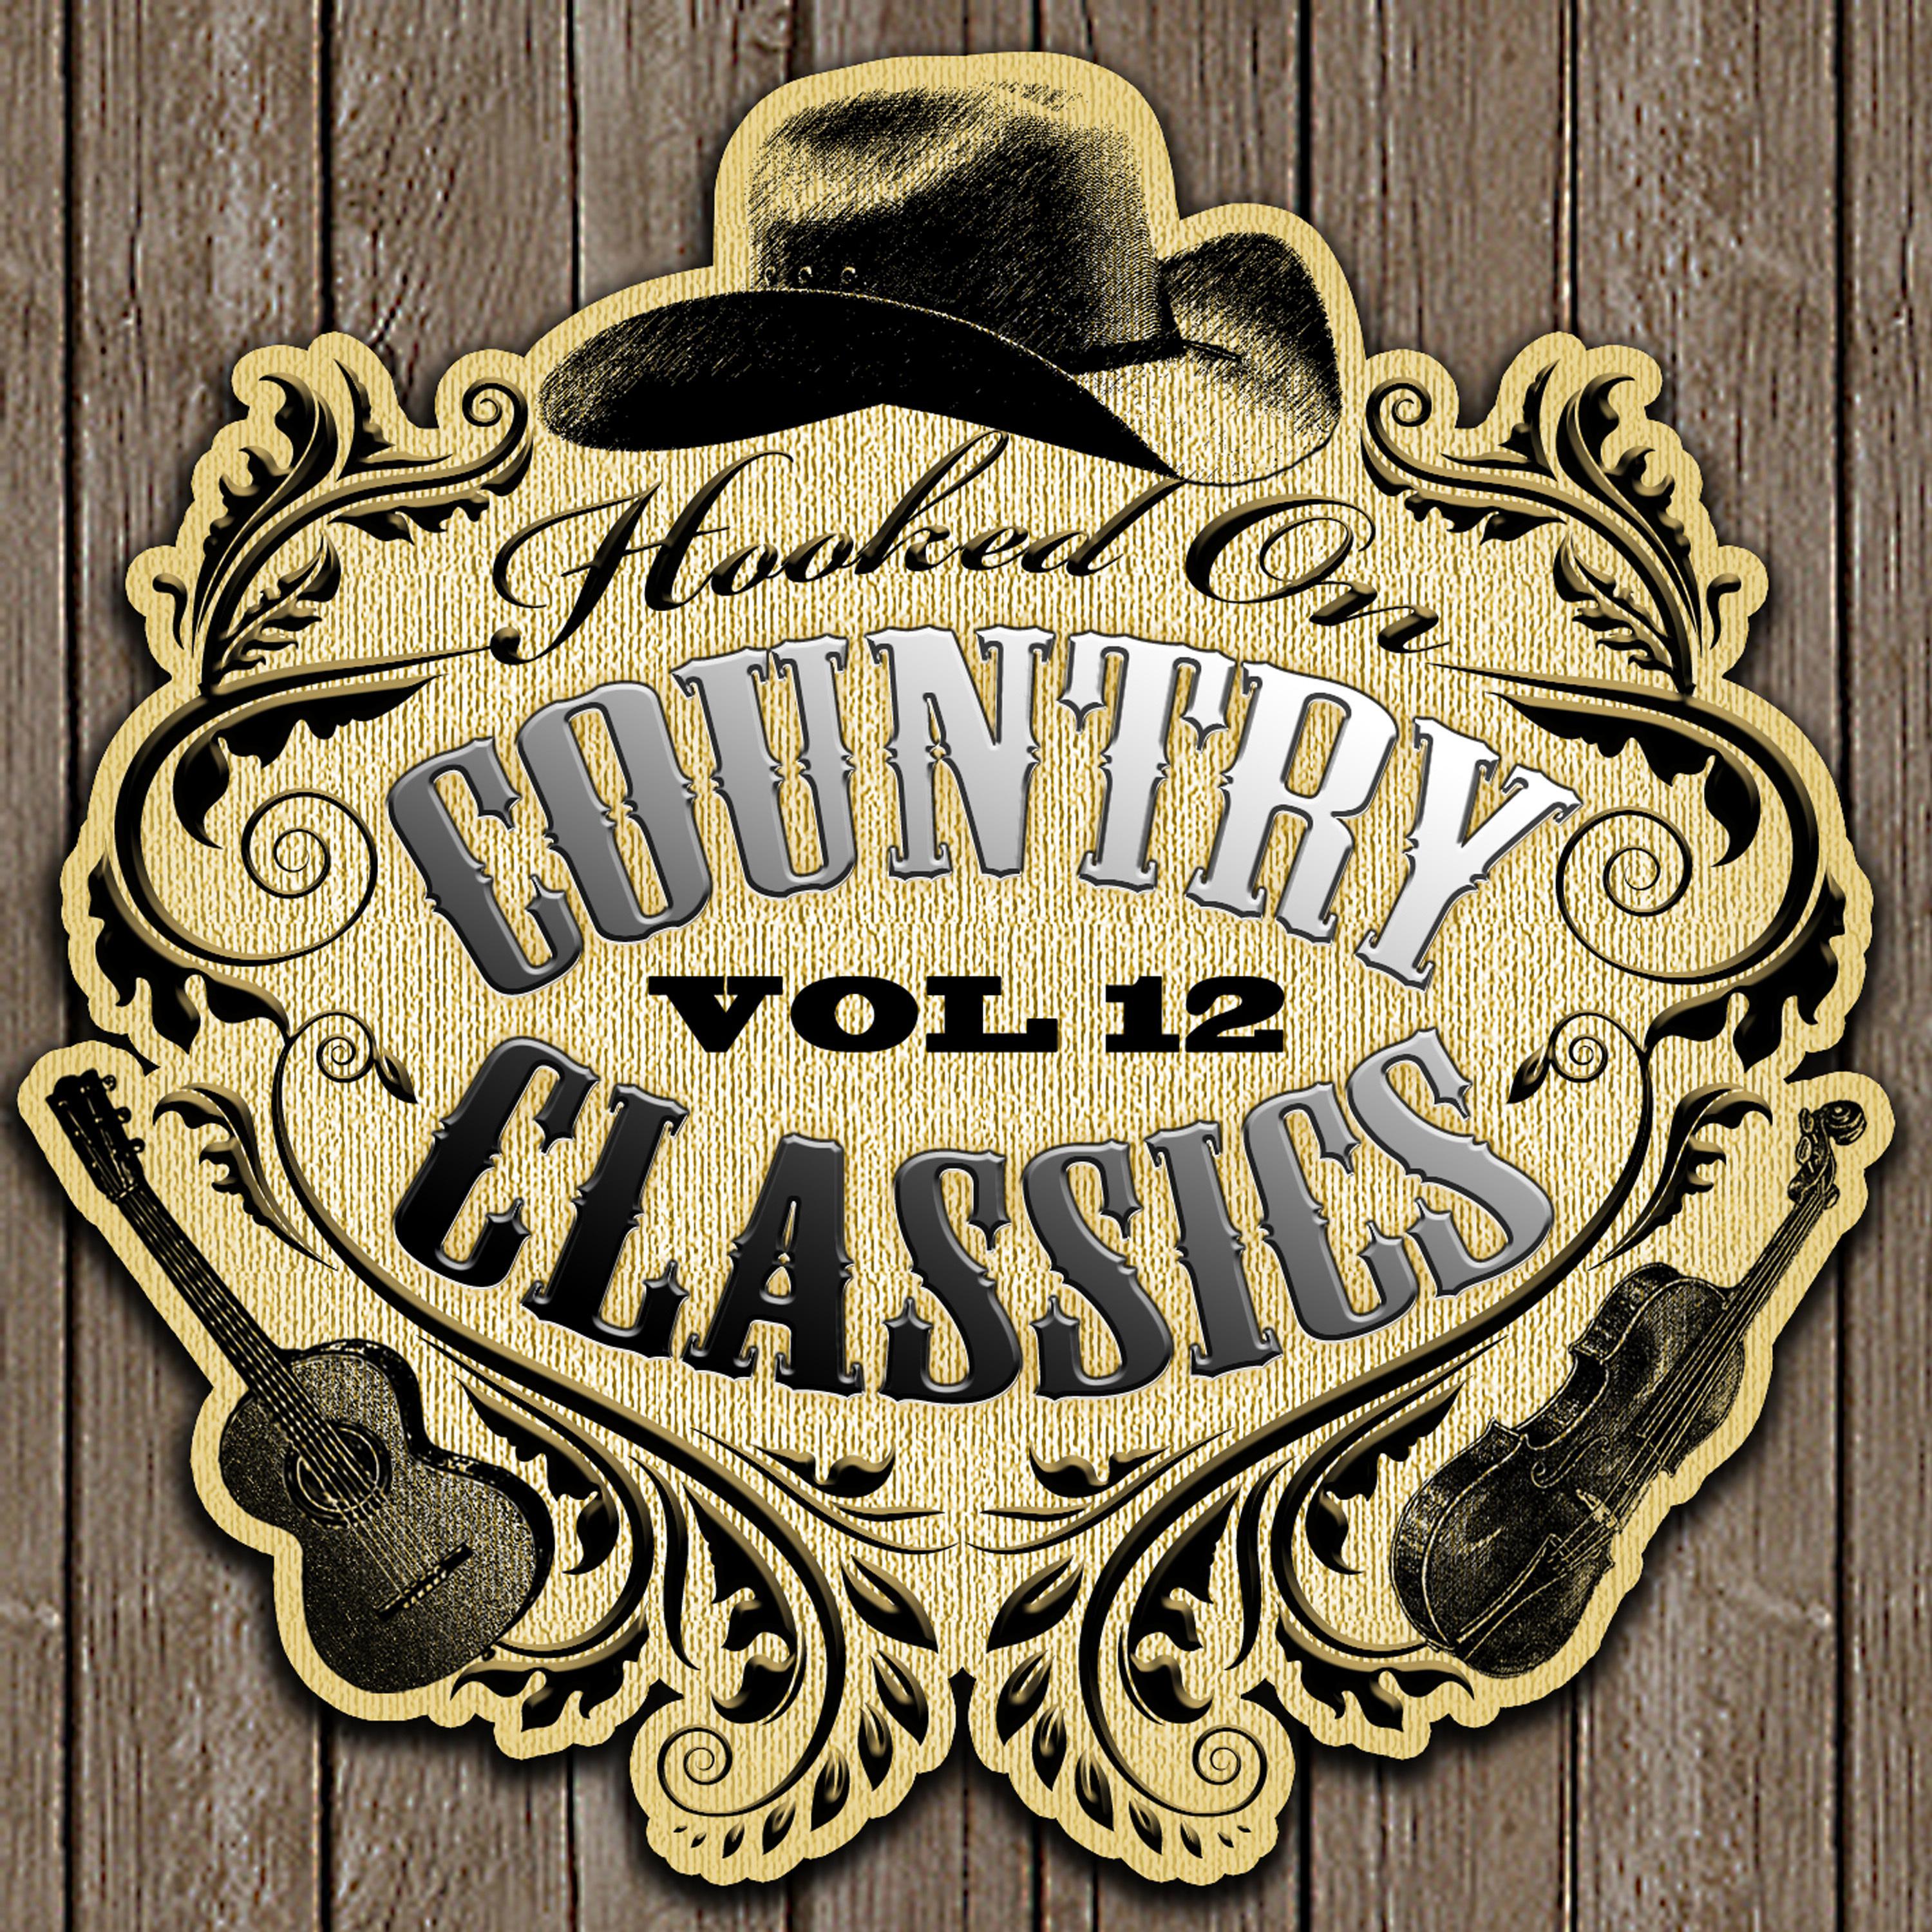 Hooked On Country Classics, Vol. 12